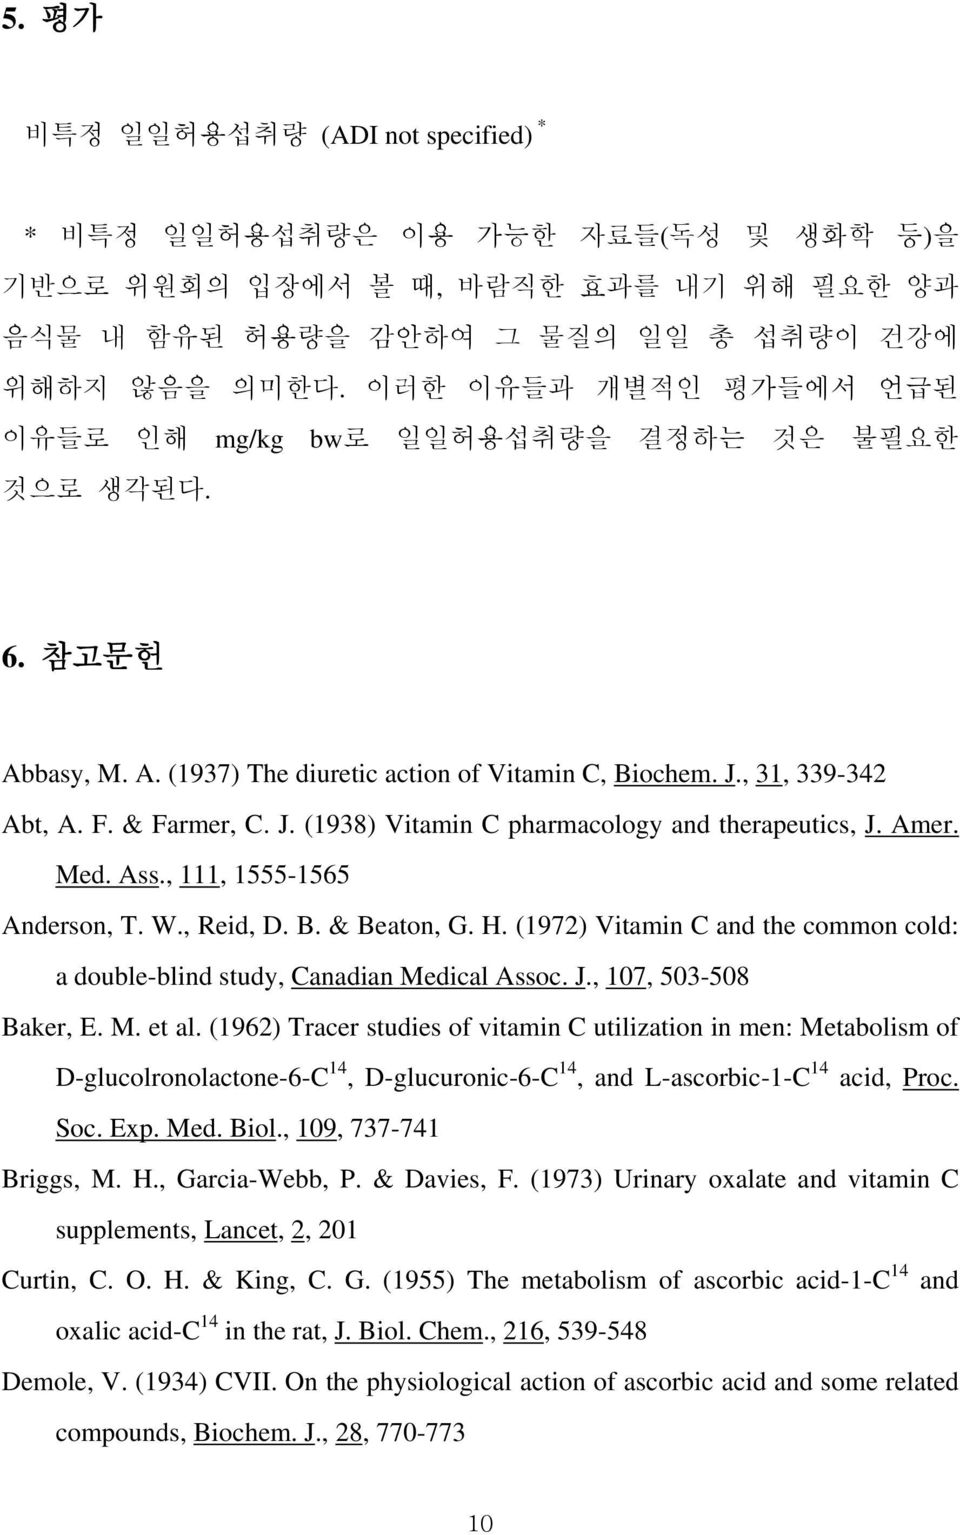 Amer. Med. Ass., 111, 1555-1565 Anderson, T. W., Reid, D. B. & Beaton, G. H. (1972) Vitamin C and the common cold: a double-blind study, Canadian Medical Assoc. J., 107, 503-508 Baker, E. M. et al.